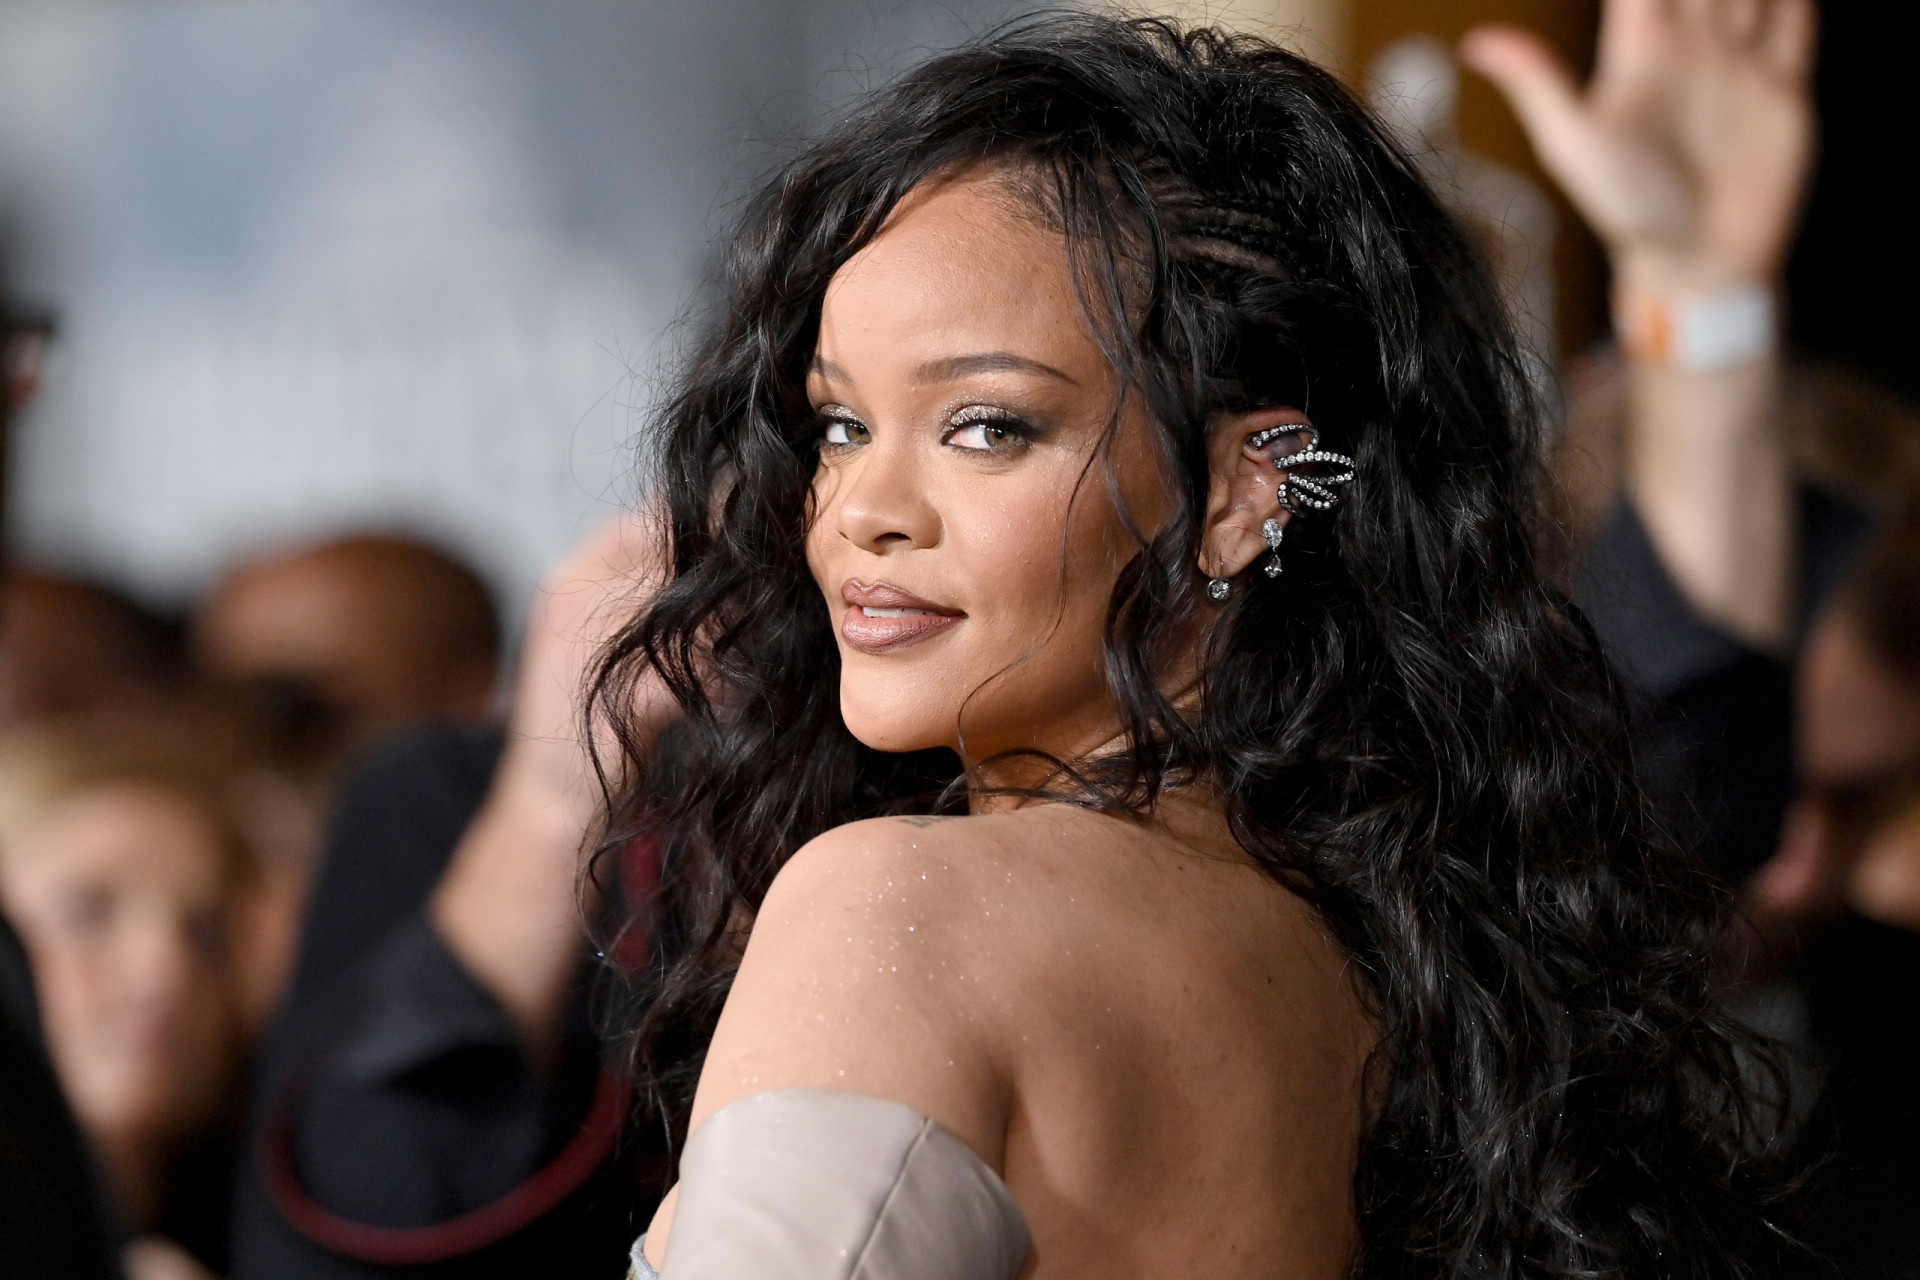 <p>The tarot cards associated with Rihanna's birth date in Pisces reveal her dreamy creativity and magnetic charisma.</p><p><a href="https://www.msn.com/en-us/community/channel/vid-7xx8mnucu55yw63we9va2gwr7uihbxwc68fxqp25x6tg4ftibpra?cvid=94631541bc0f4f89bfd59158d696ad7e">Follow us and access great exclusive content every day</a></p>